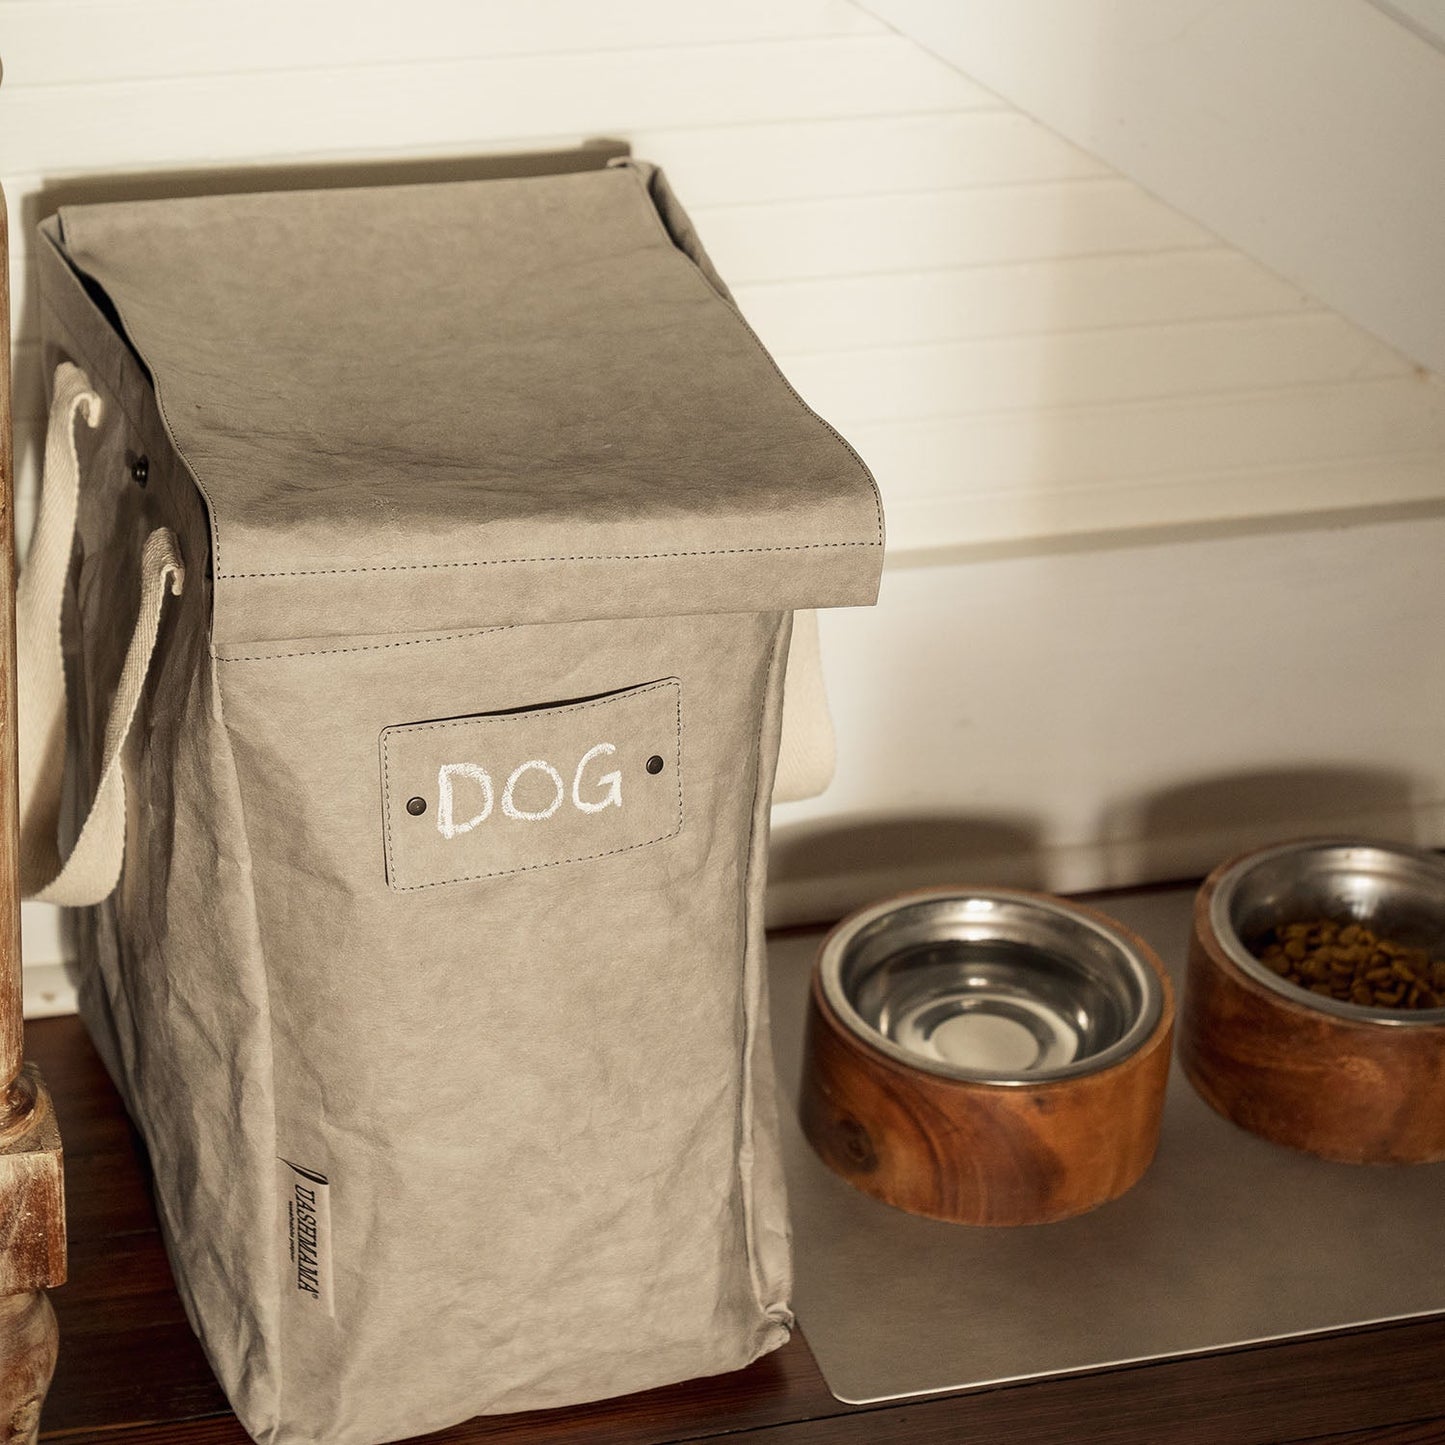 A washable paper recycling bag in pale grey is seen standing next to two wooden and metal dog bowls. One bowl contains water and the other contains dog food. The washable paper tag on the washable paper recycling tote reads "DOG".